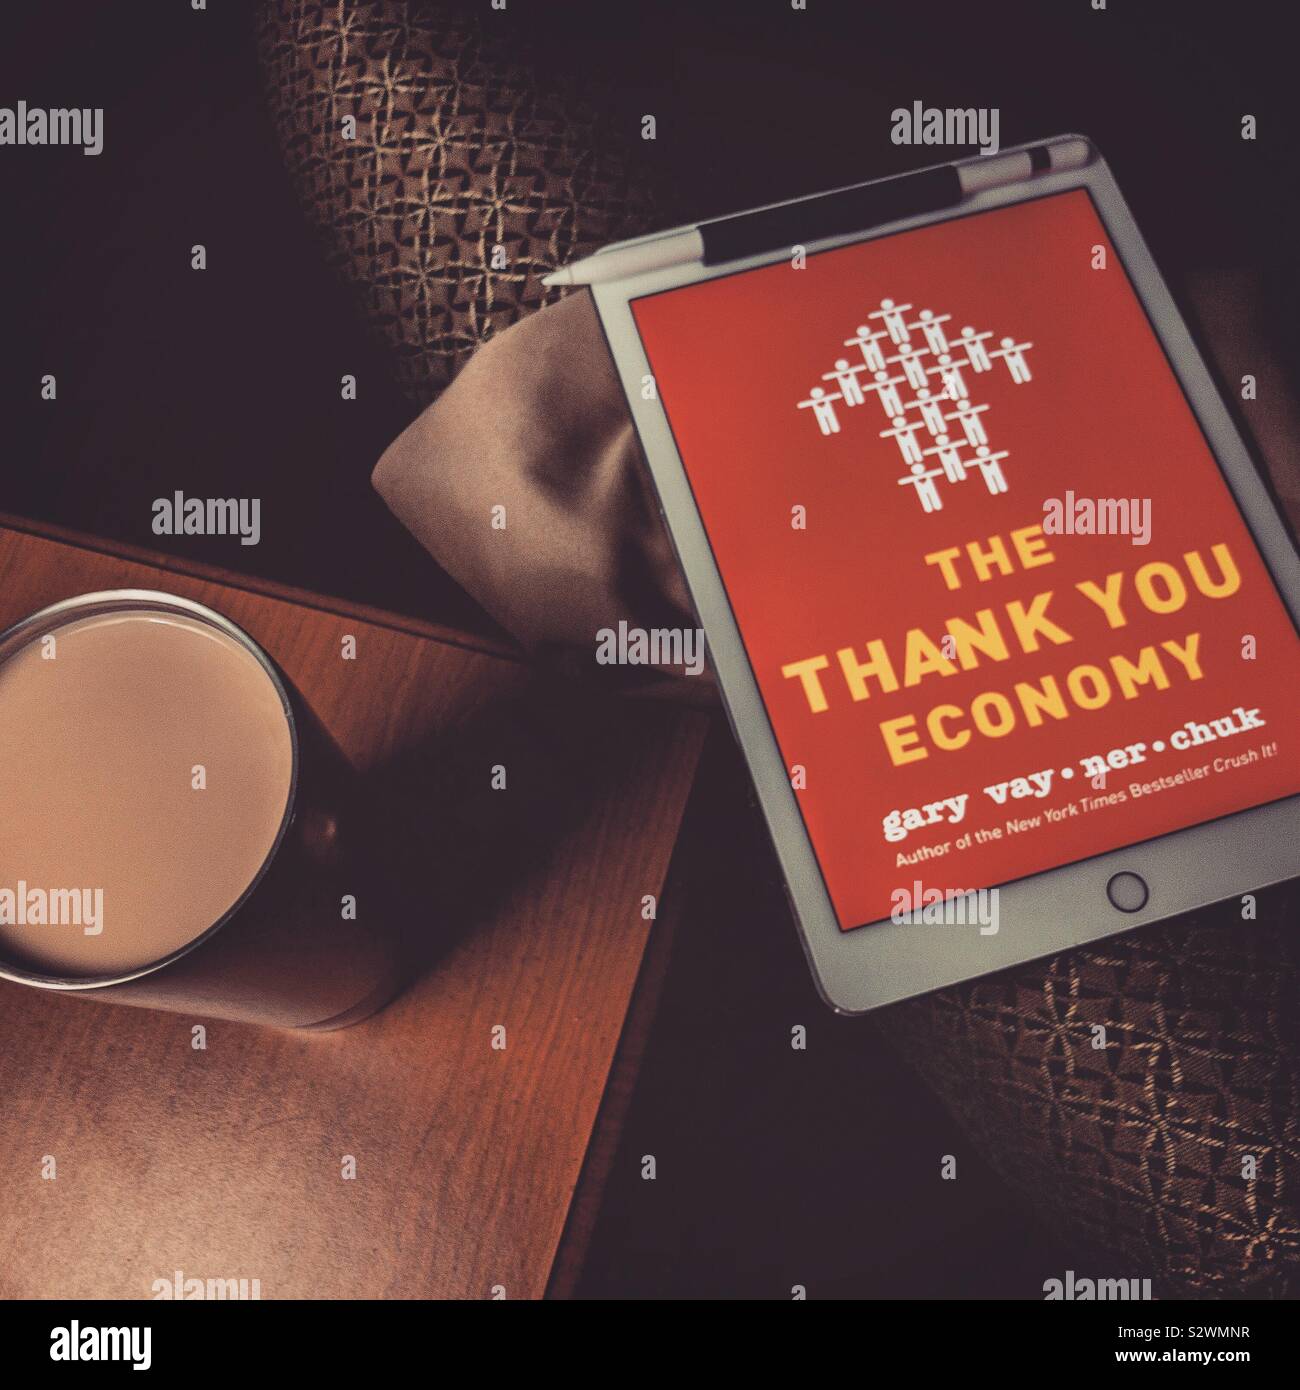 The cover of 'The Thank You Economy' by entrepreneur Gary Vaynerchuk is pictured in the Kindle app on an Apple iPad. (Photo by Carmen K. Sisson/Cloudybright) Stock Photo